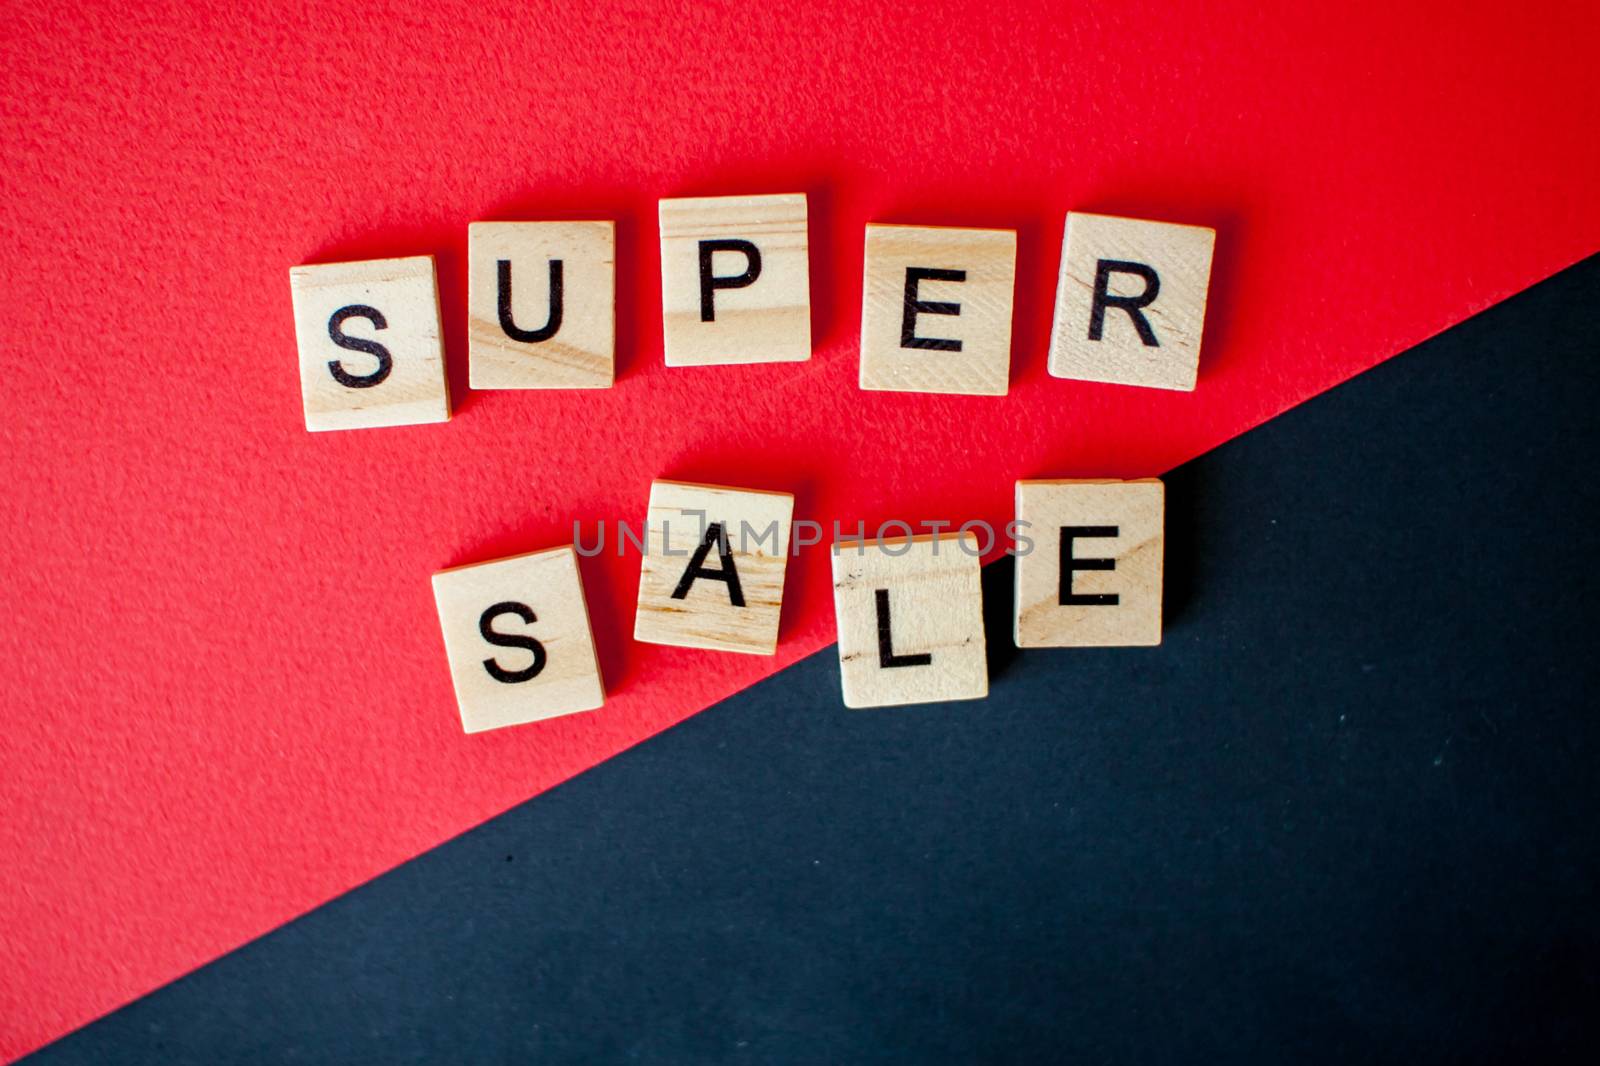 The inscription super sale from wooden blocks on a black and red background